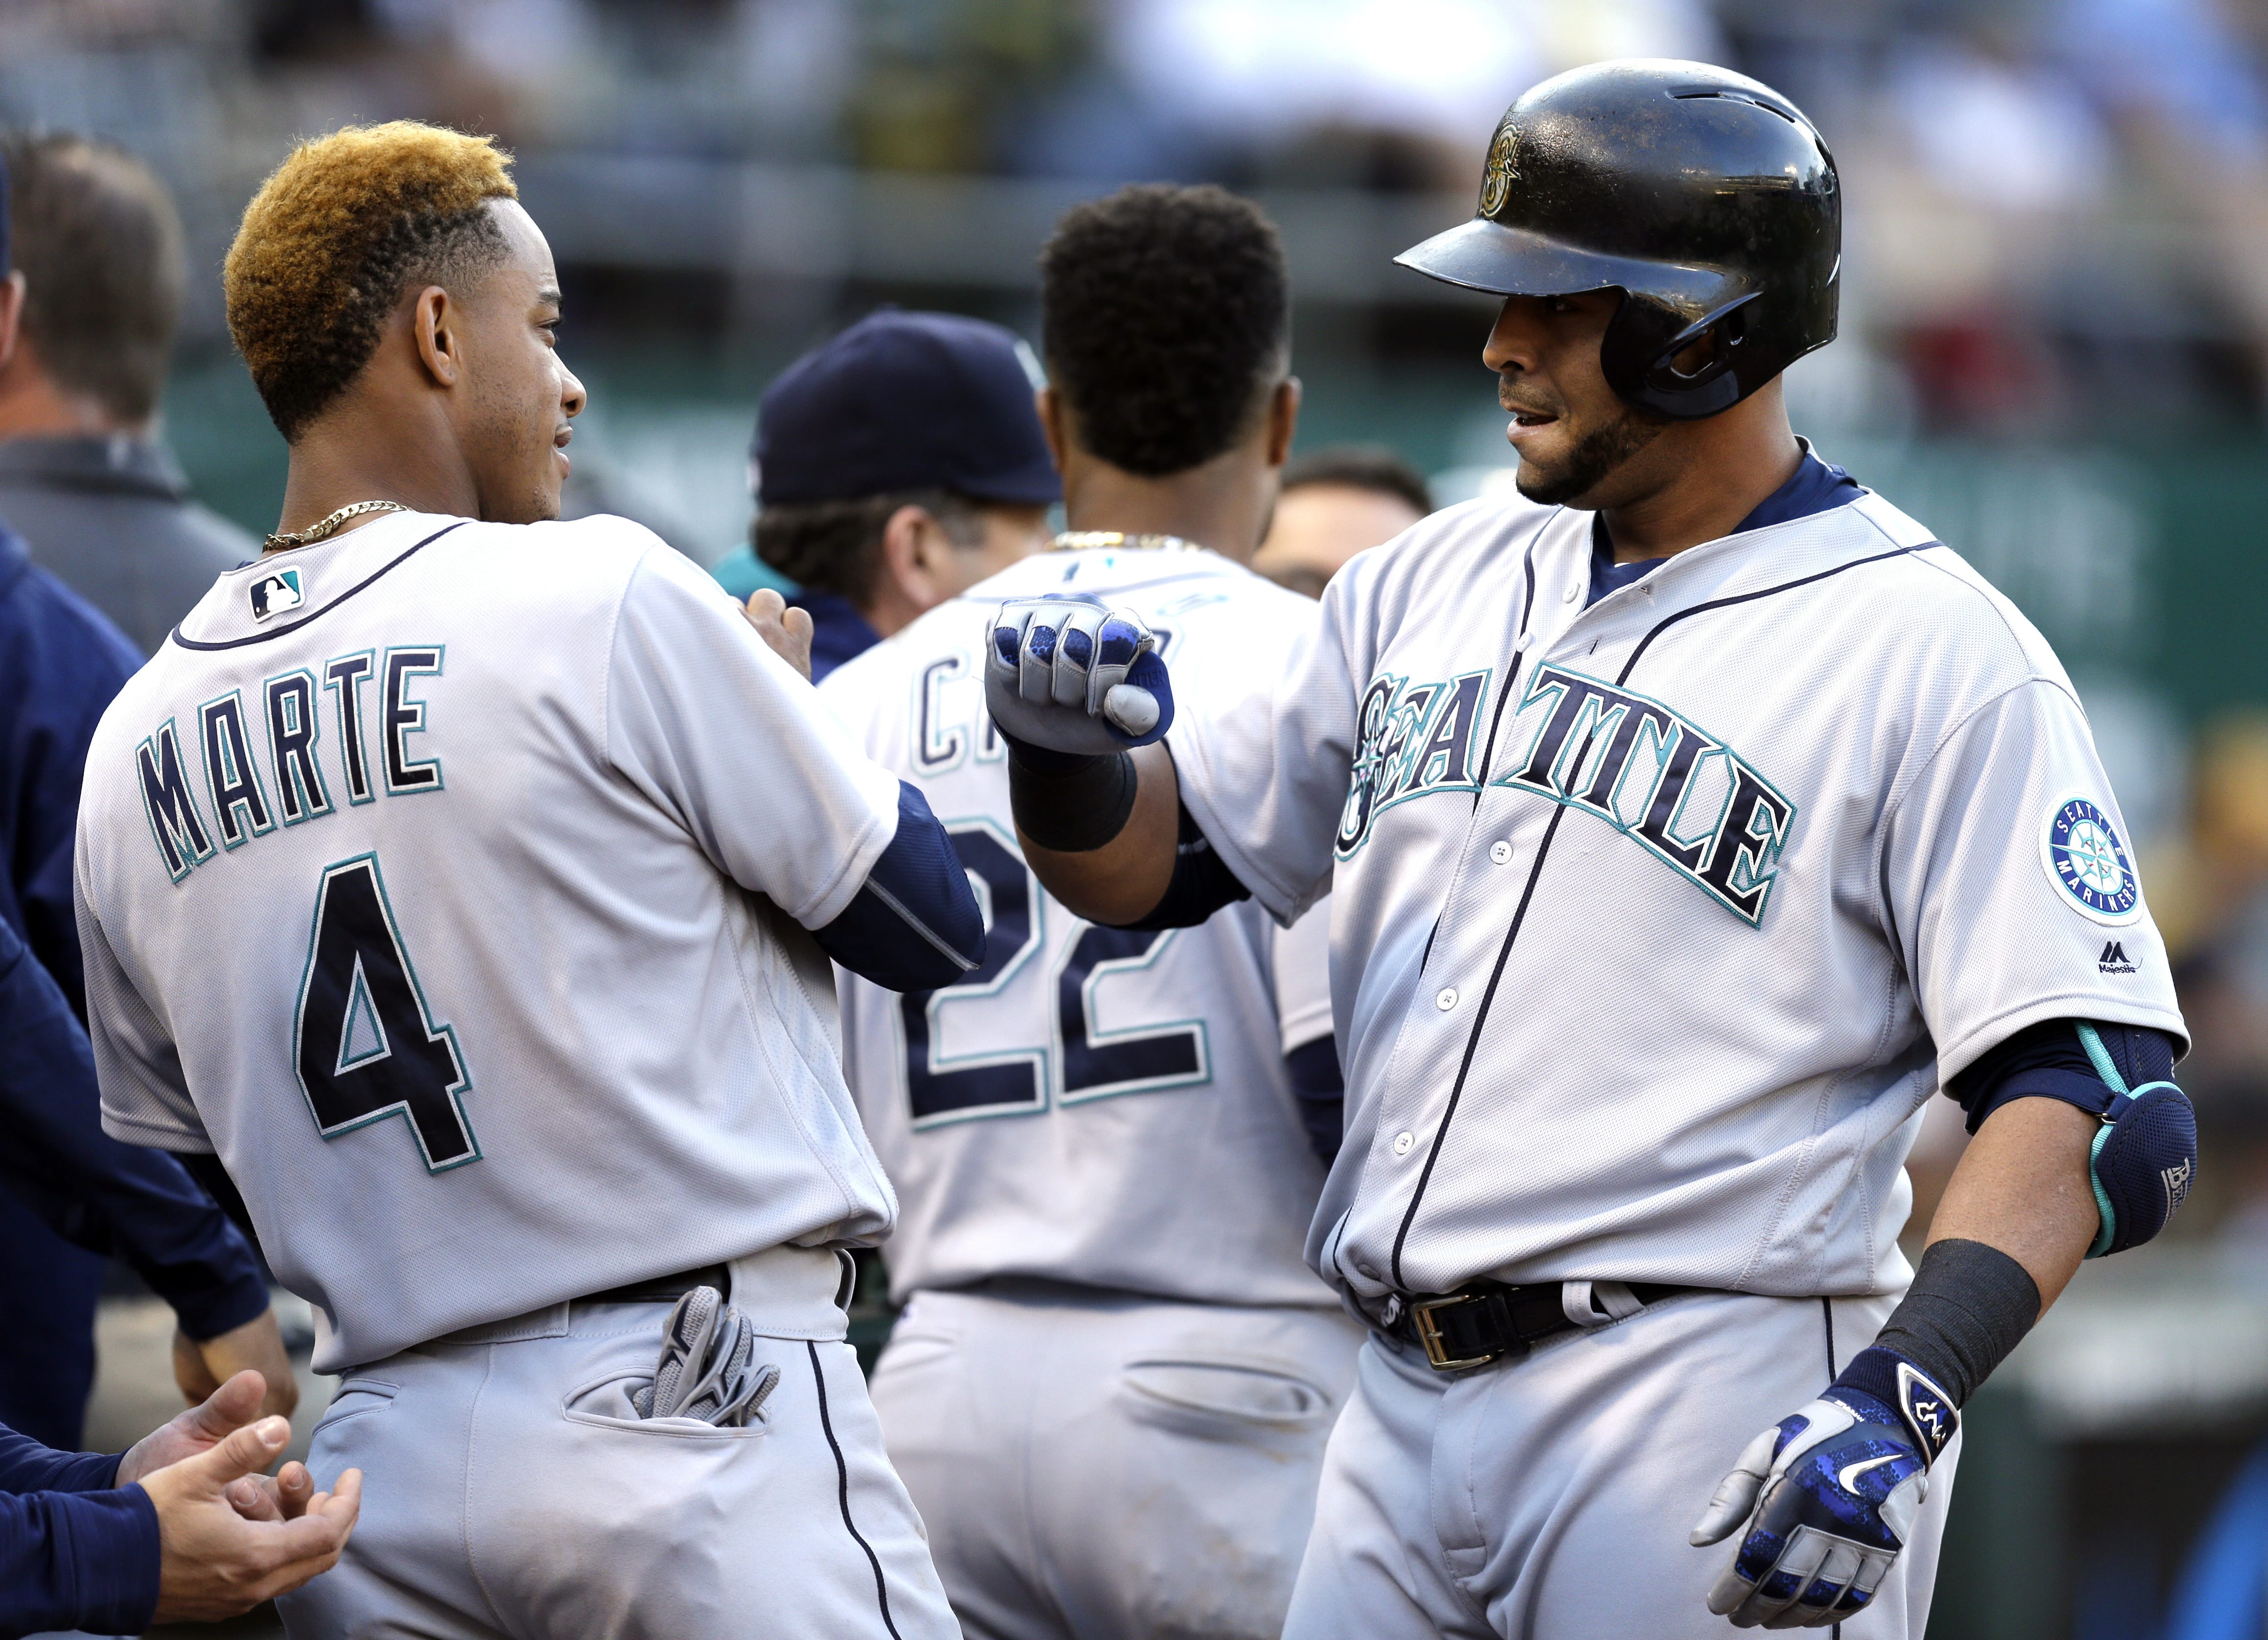 Seattle Mariners' Nelson Cruz, right, celebrates with Ketel Marte (4) after hitting a home run off Oakland Athletics pitcher Kendall Graveman in the fourth inning of a baseball game Saturday, Aug. 13, 2016, in Oakland, Calif.